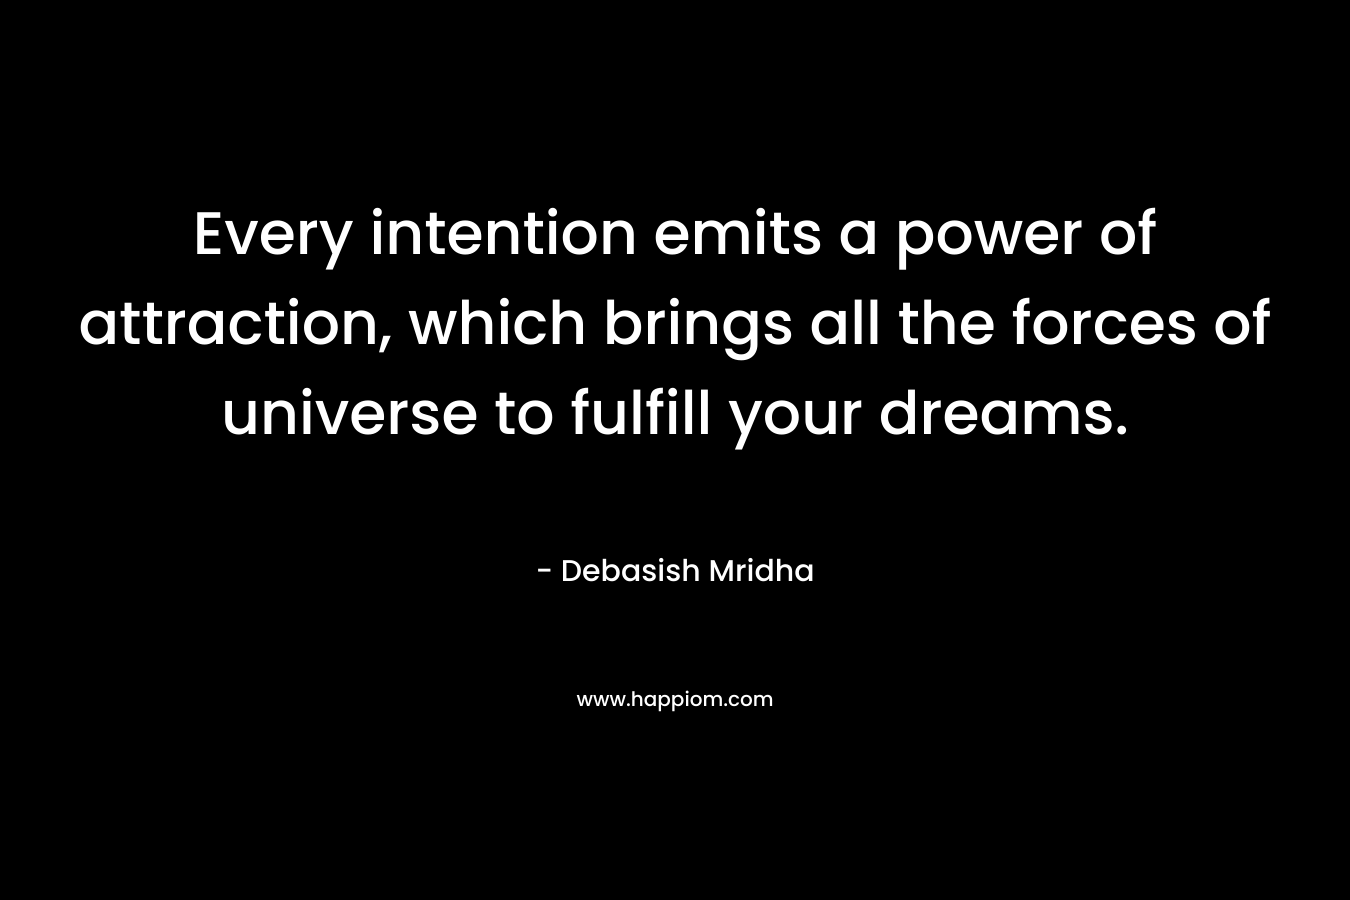 Every intention emits a power of attraction, which brings all the forces of universe to fulfill your dreams.